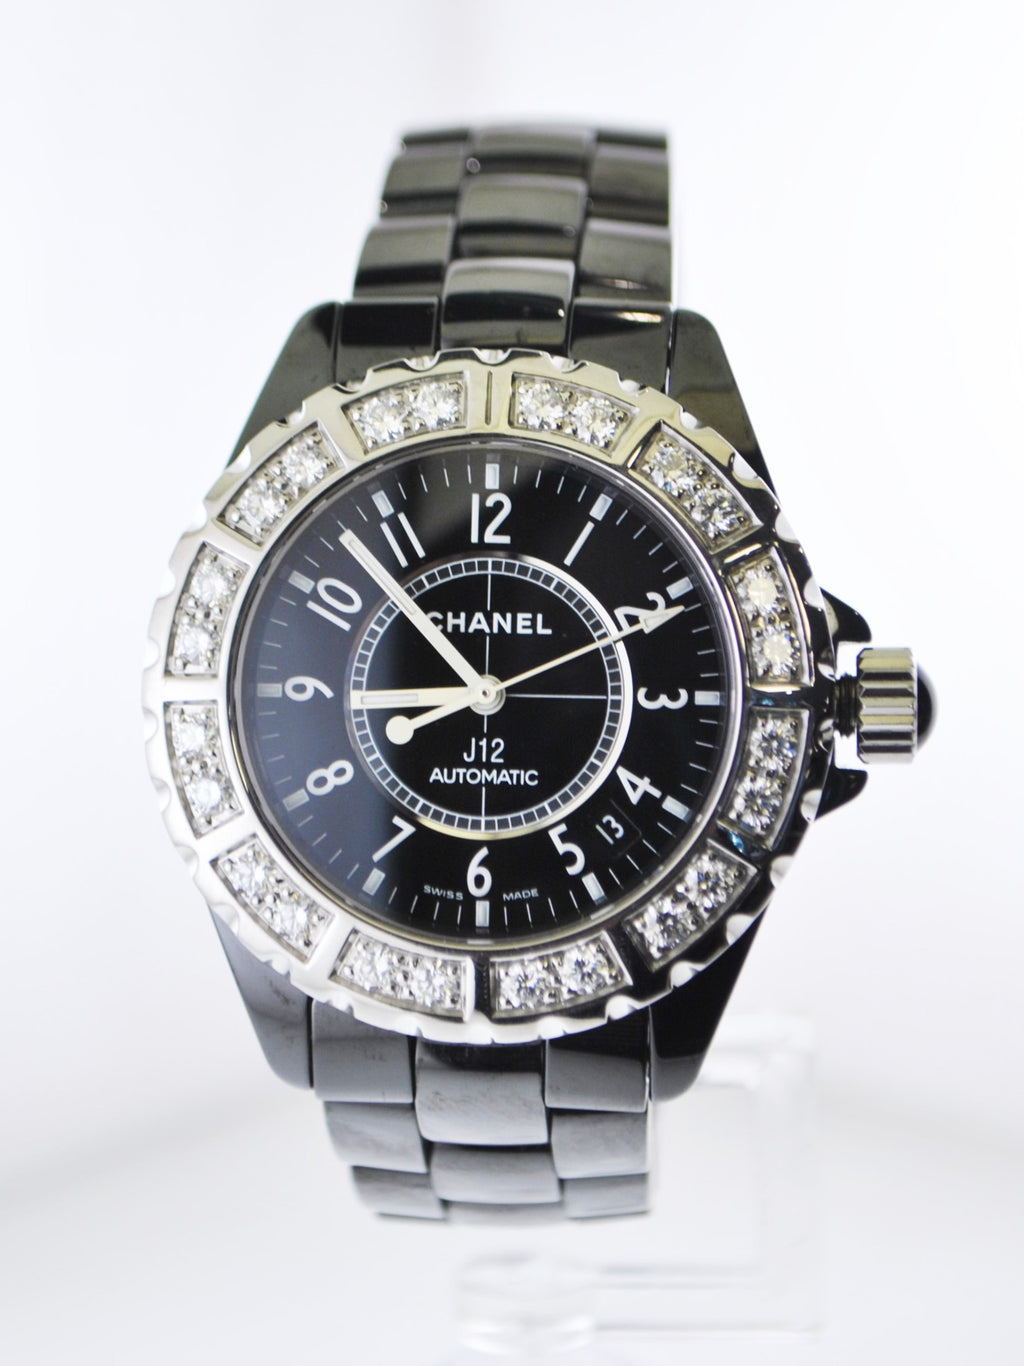 CHANEL J12 Diamond Automatic Wristwatch in Stainless Steel and Black  Ceramic - $25K VALUE w/ CoA!